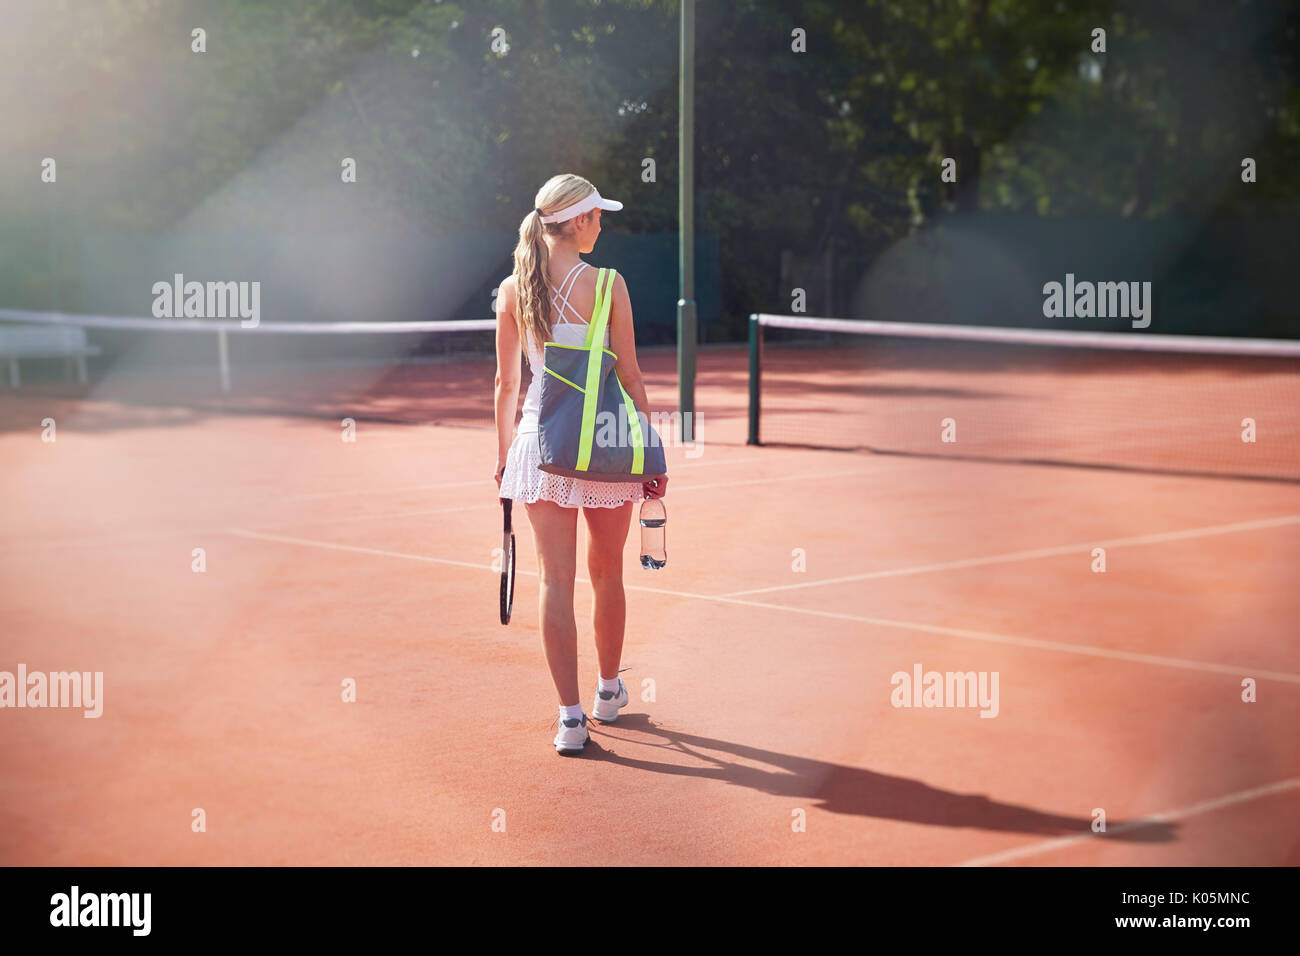 Young female tennis player walking with tennis racket, bag and water bottle on sunny clay tennis court Stock Photo